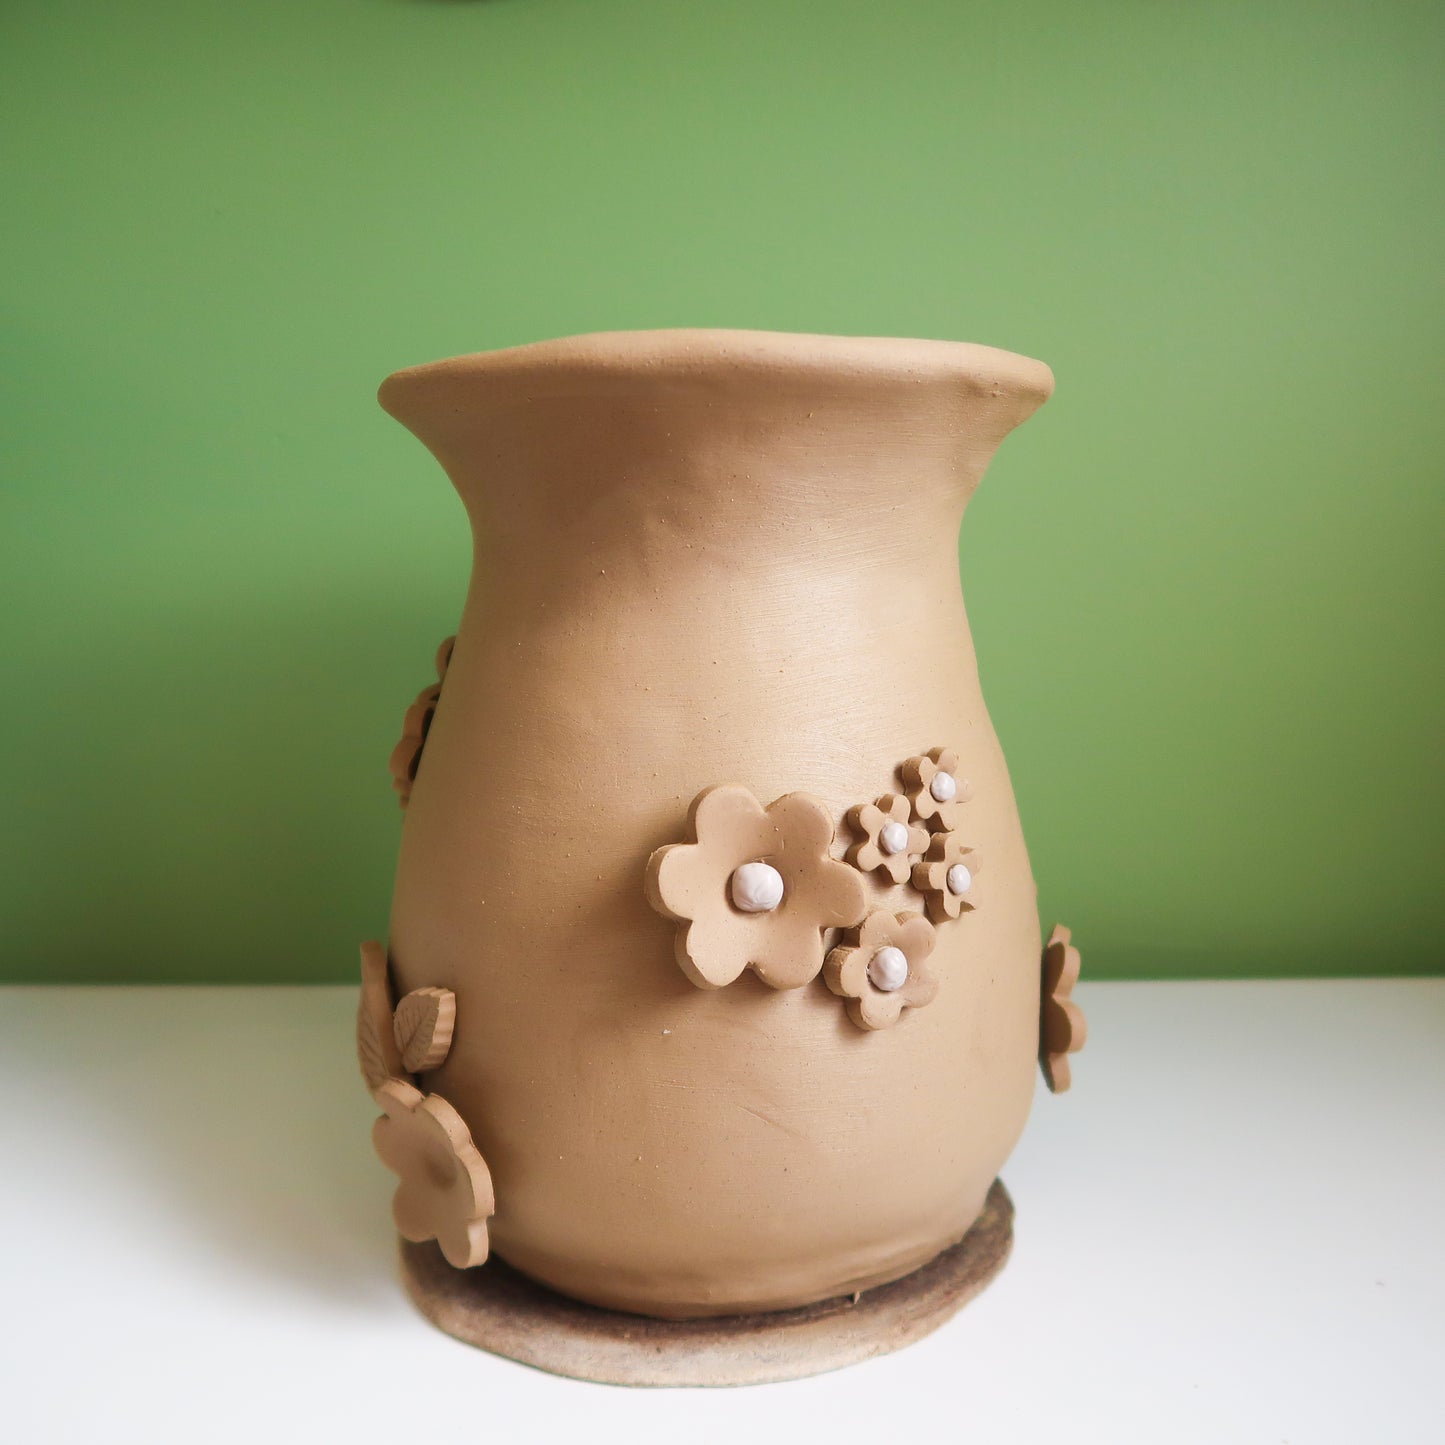 Deposit for a Pottery Party - book your workshop date